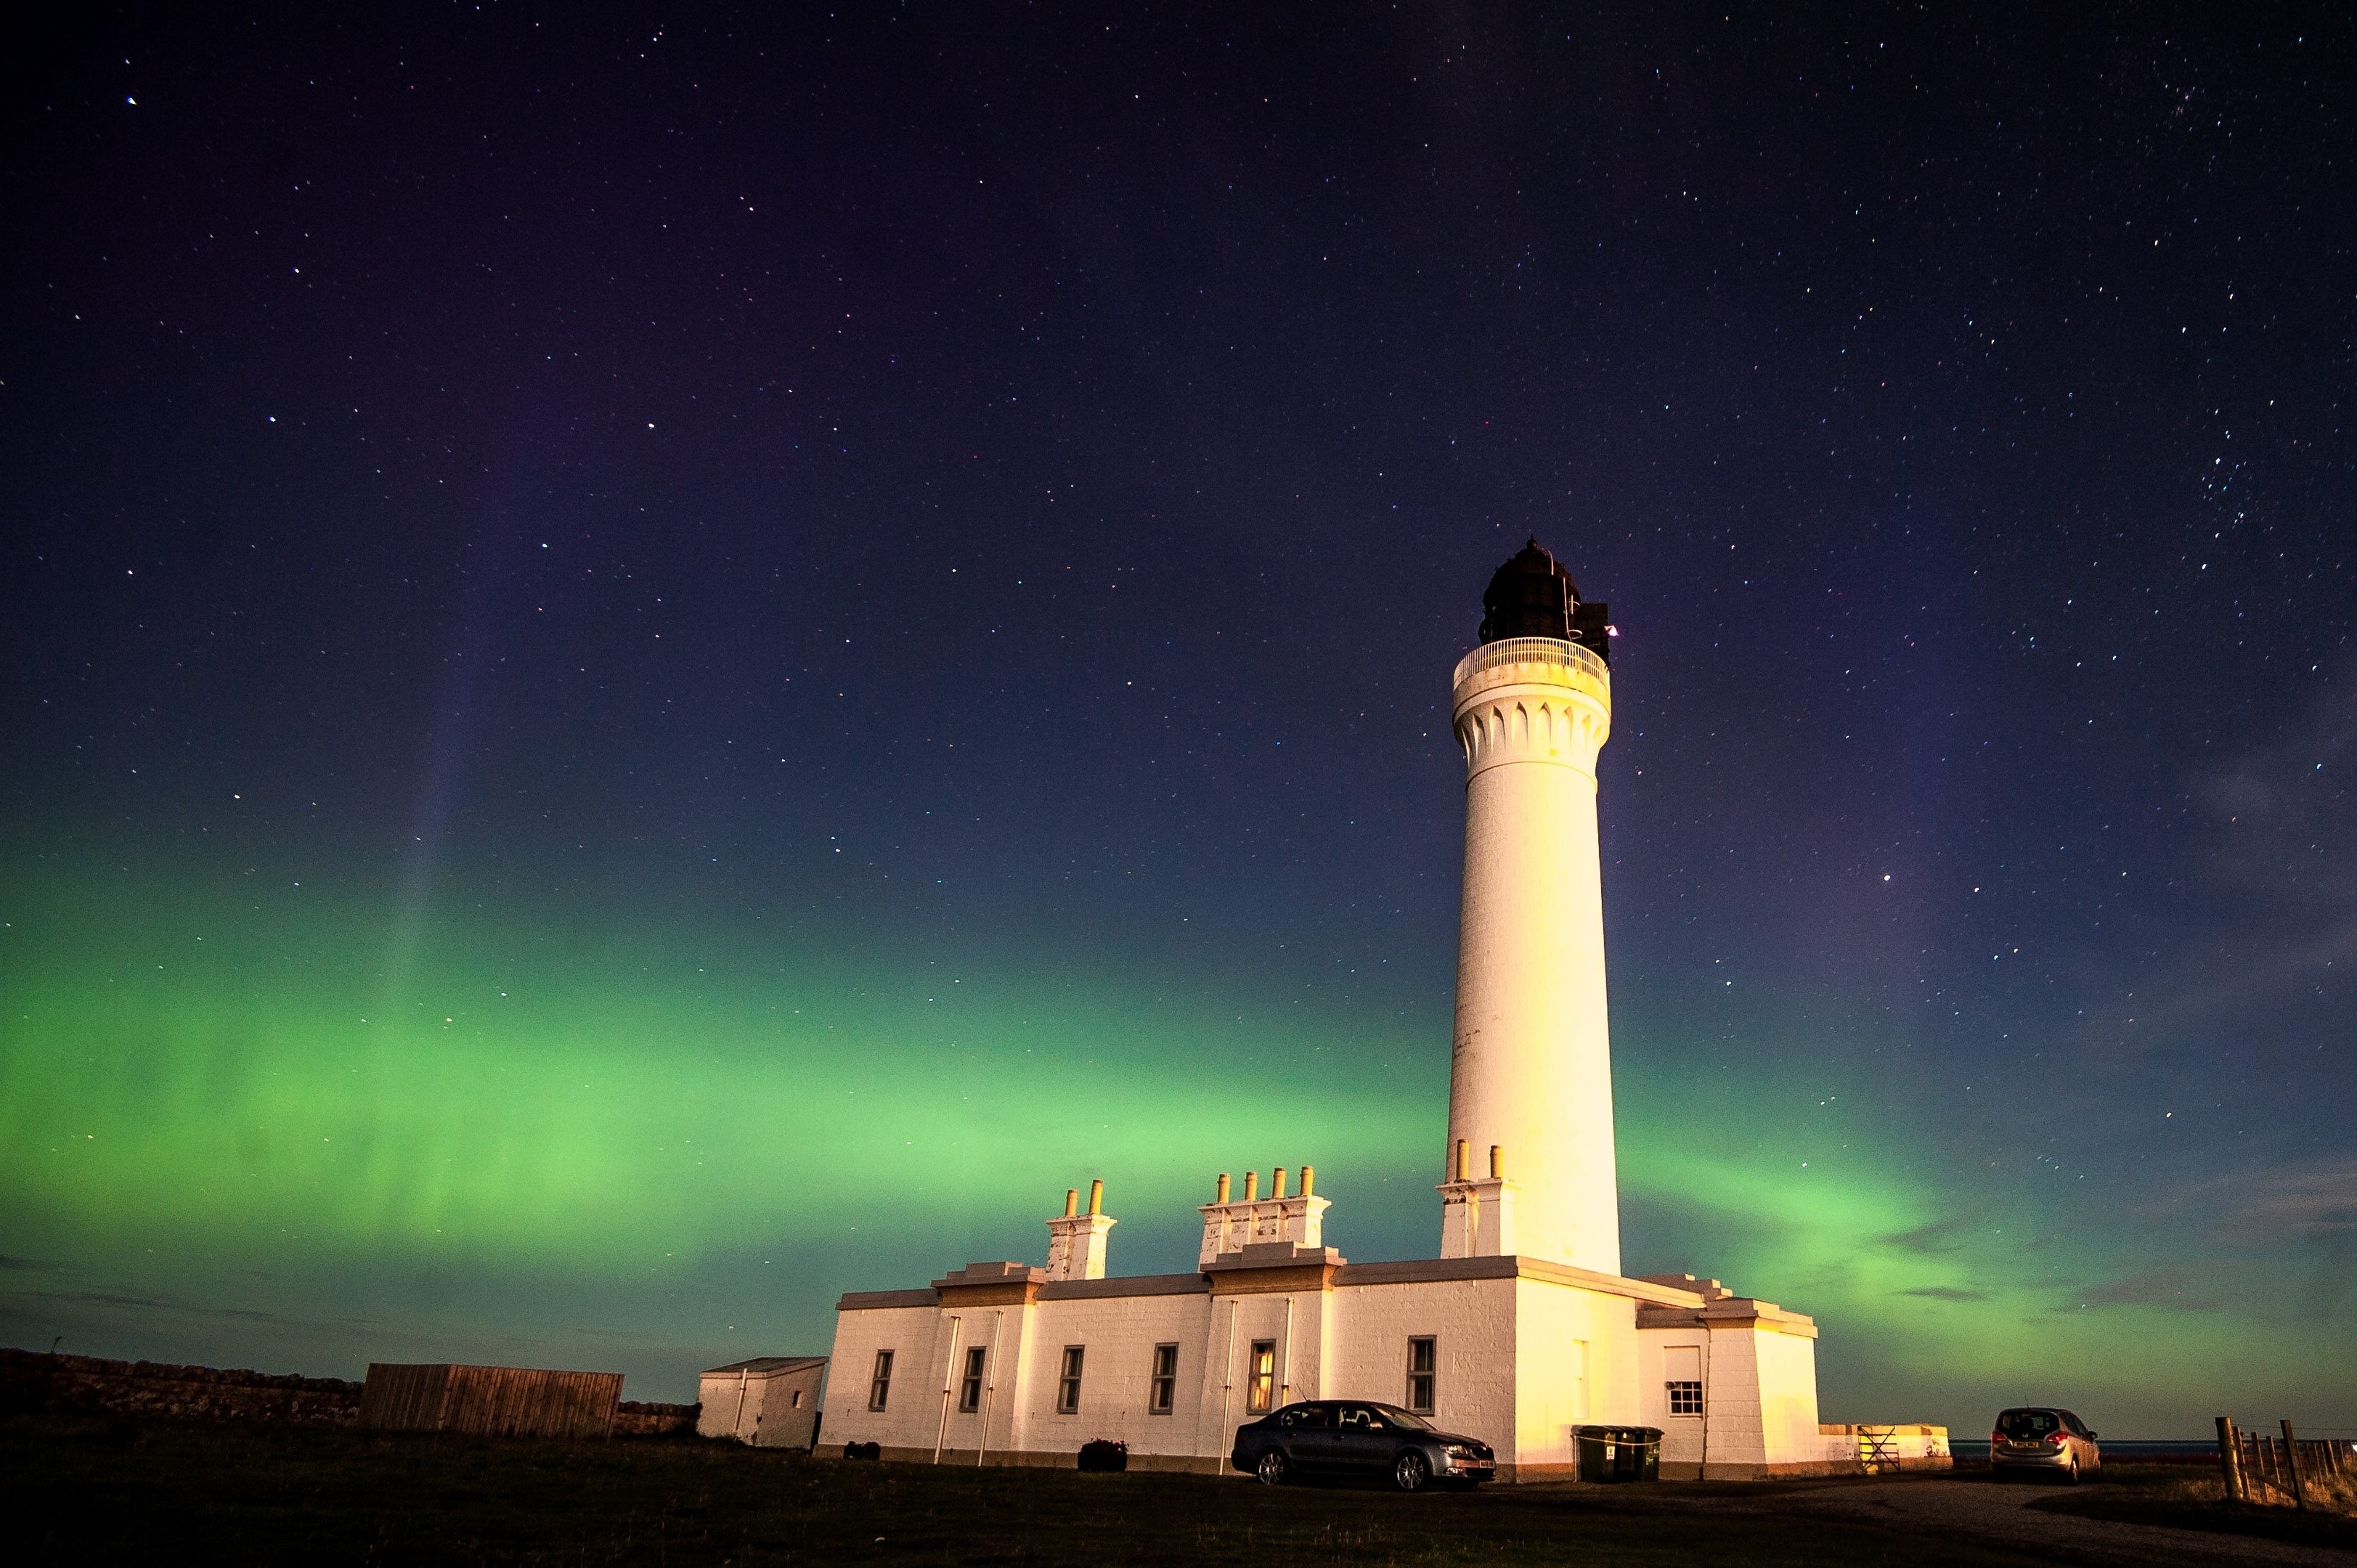 The Northern Lights, Aurora Borealis, are seen over the lighthouse in Lossiemouth, Scotland